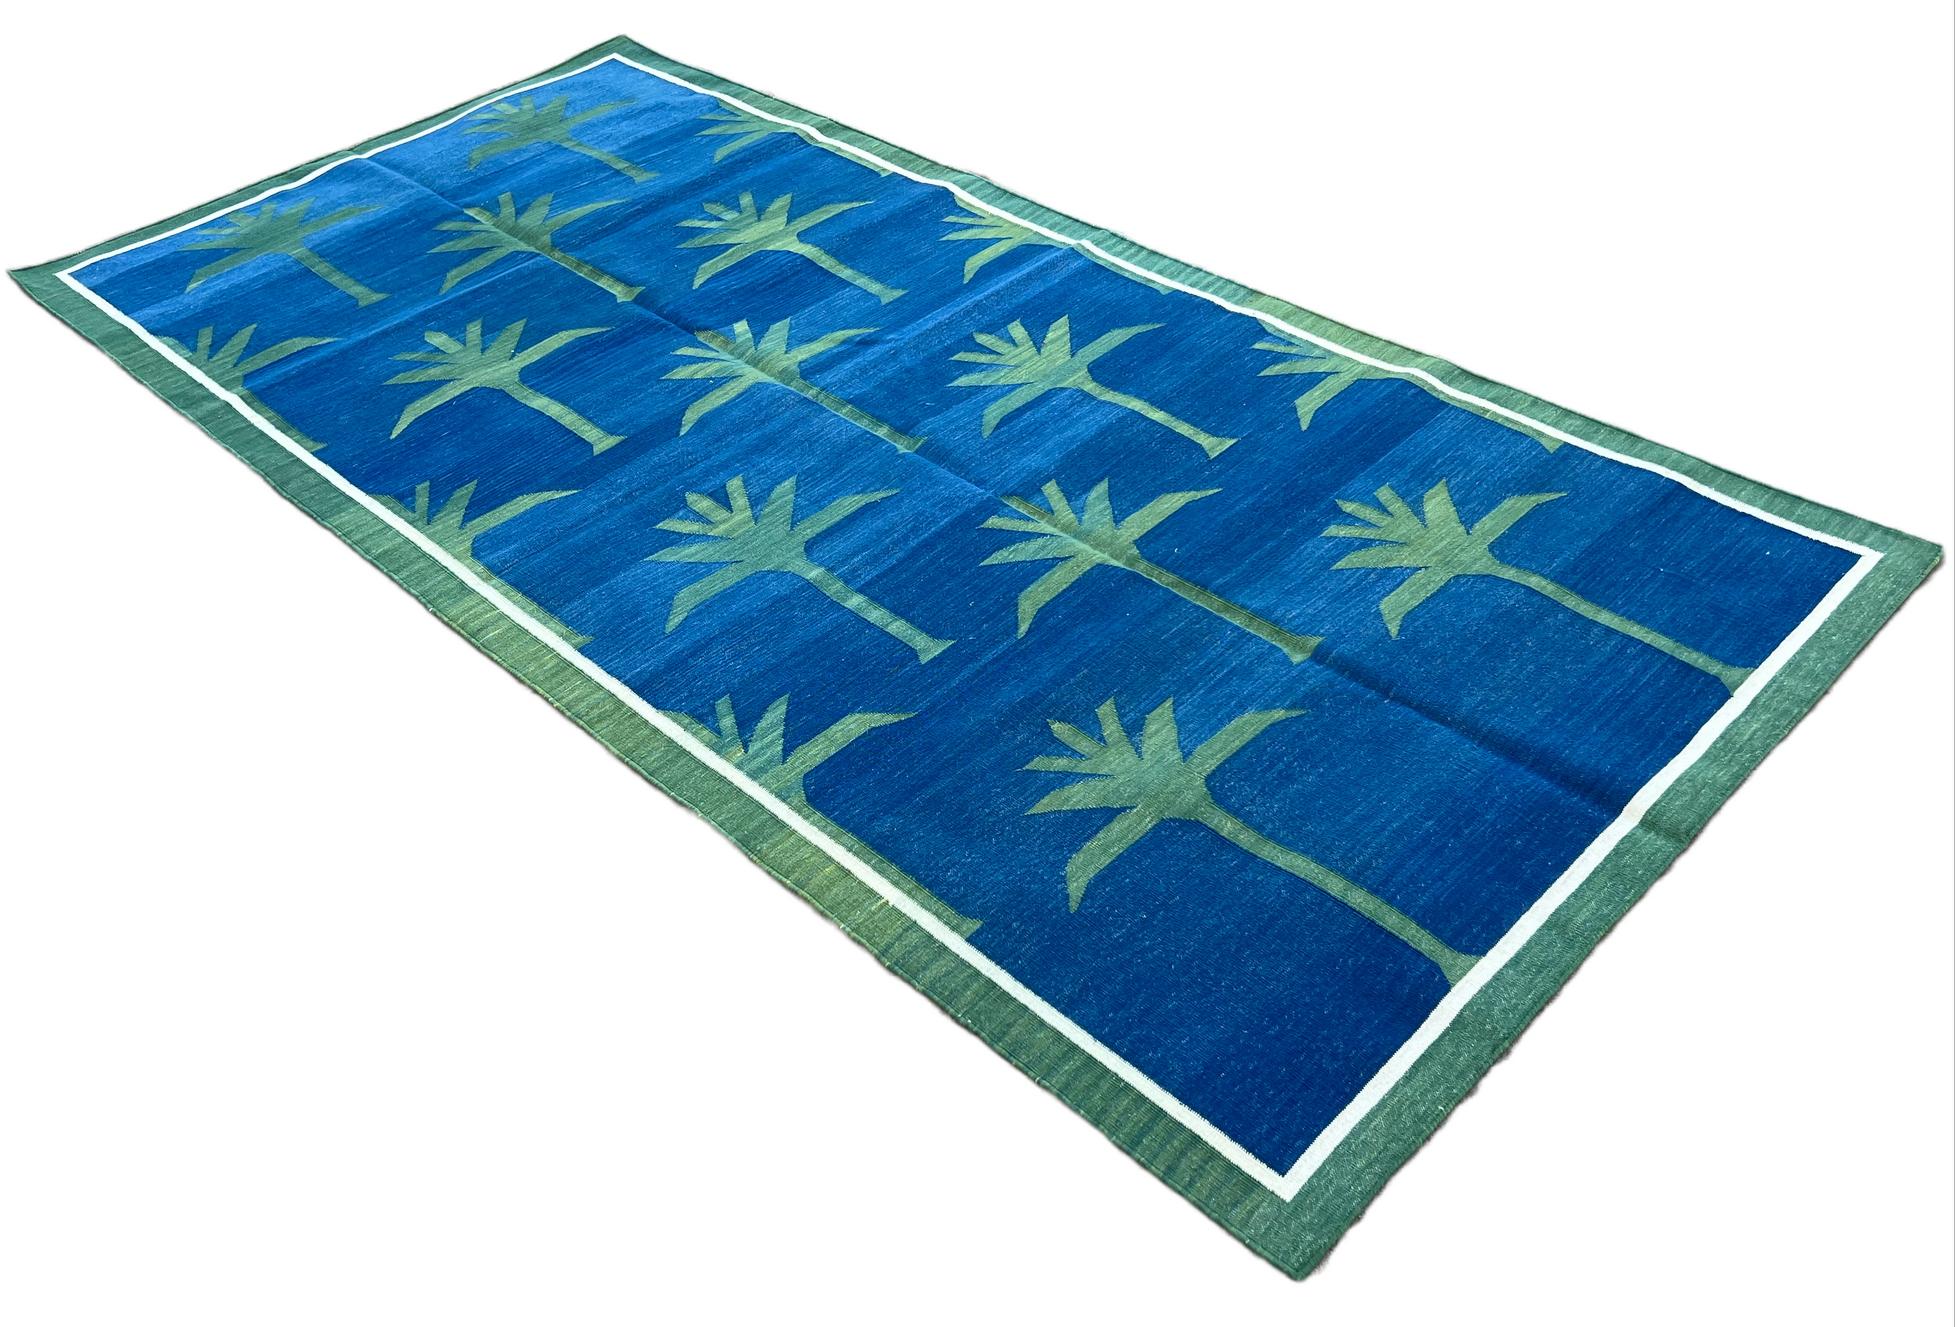 Hand-Woven Handmade Cotton Area Flat Weave Rug, Indigo Blue, Green Palm Tree Indian Dhurrie For Sale